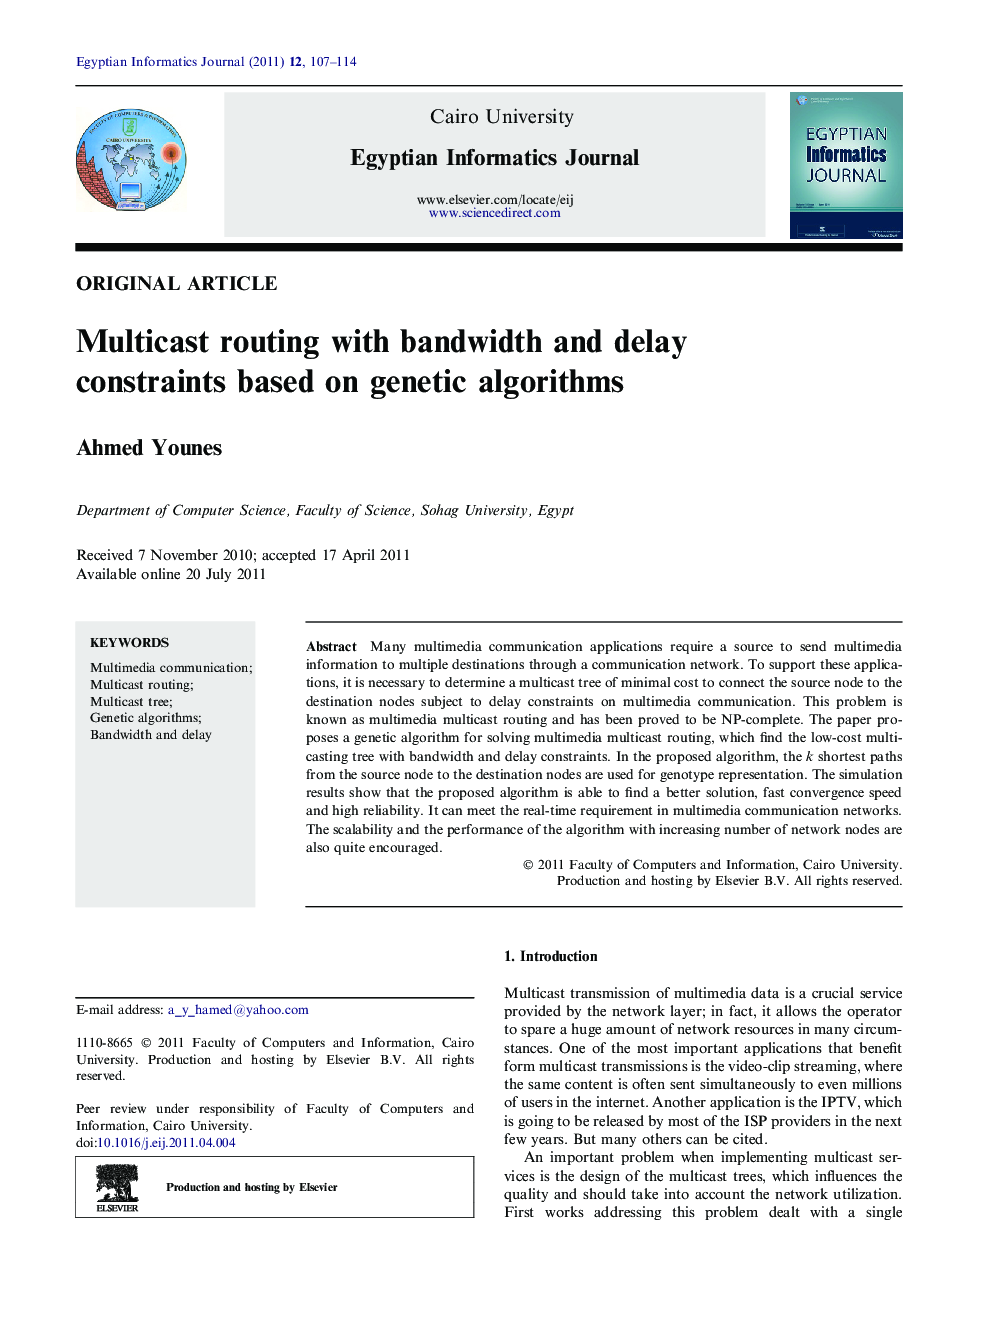 Multicast routing with bandwidth and delay constraints based on genetic algorithms